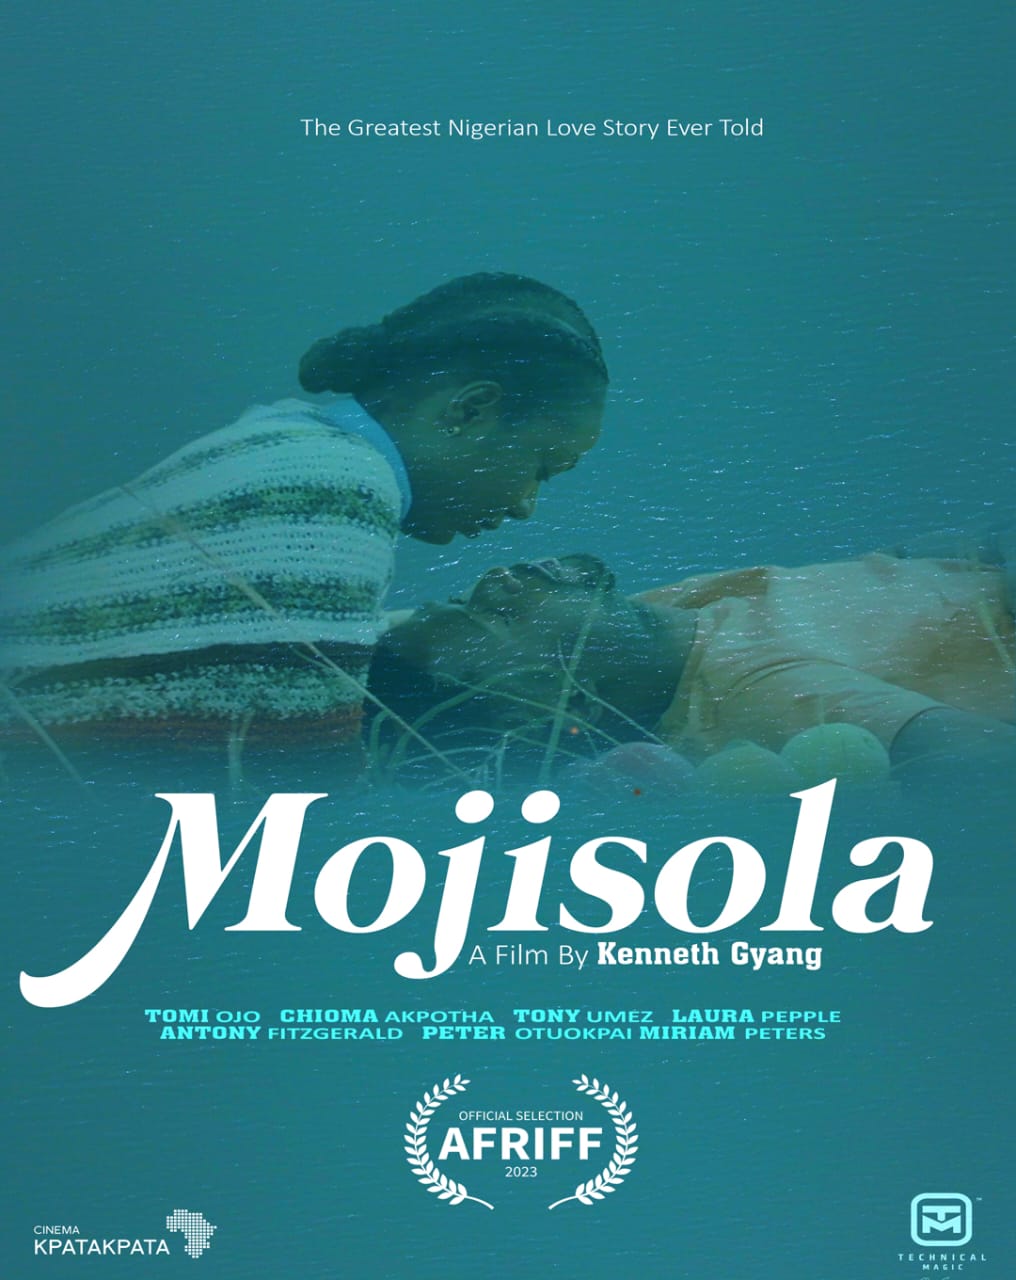 WhatsApp Image 2023 11 07 at 11.16.55 AM 1 - “Mojisola,” Kenneth Gyang’s Dreamy Love Tale, Heads to AFRIFF, Stars Tomi Ojo in Leading Role